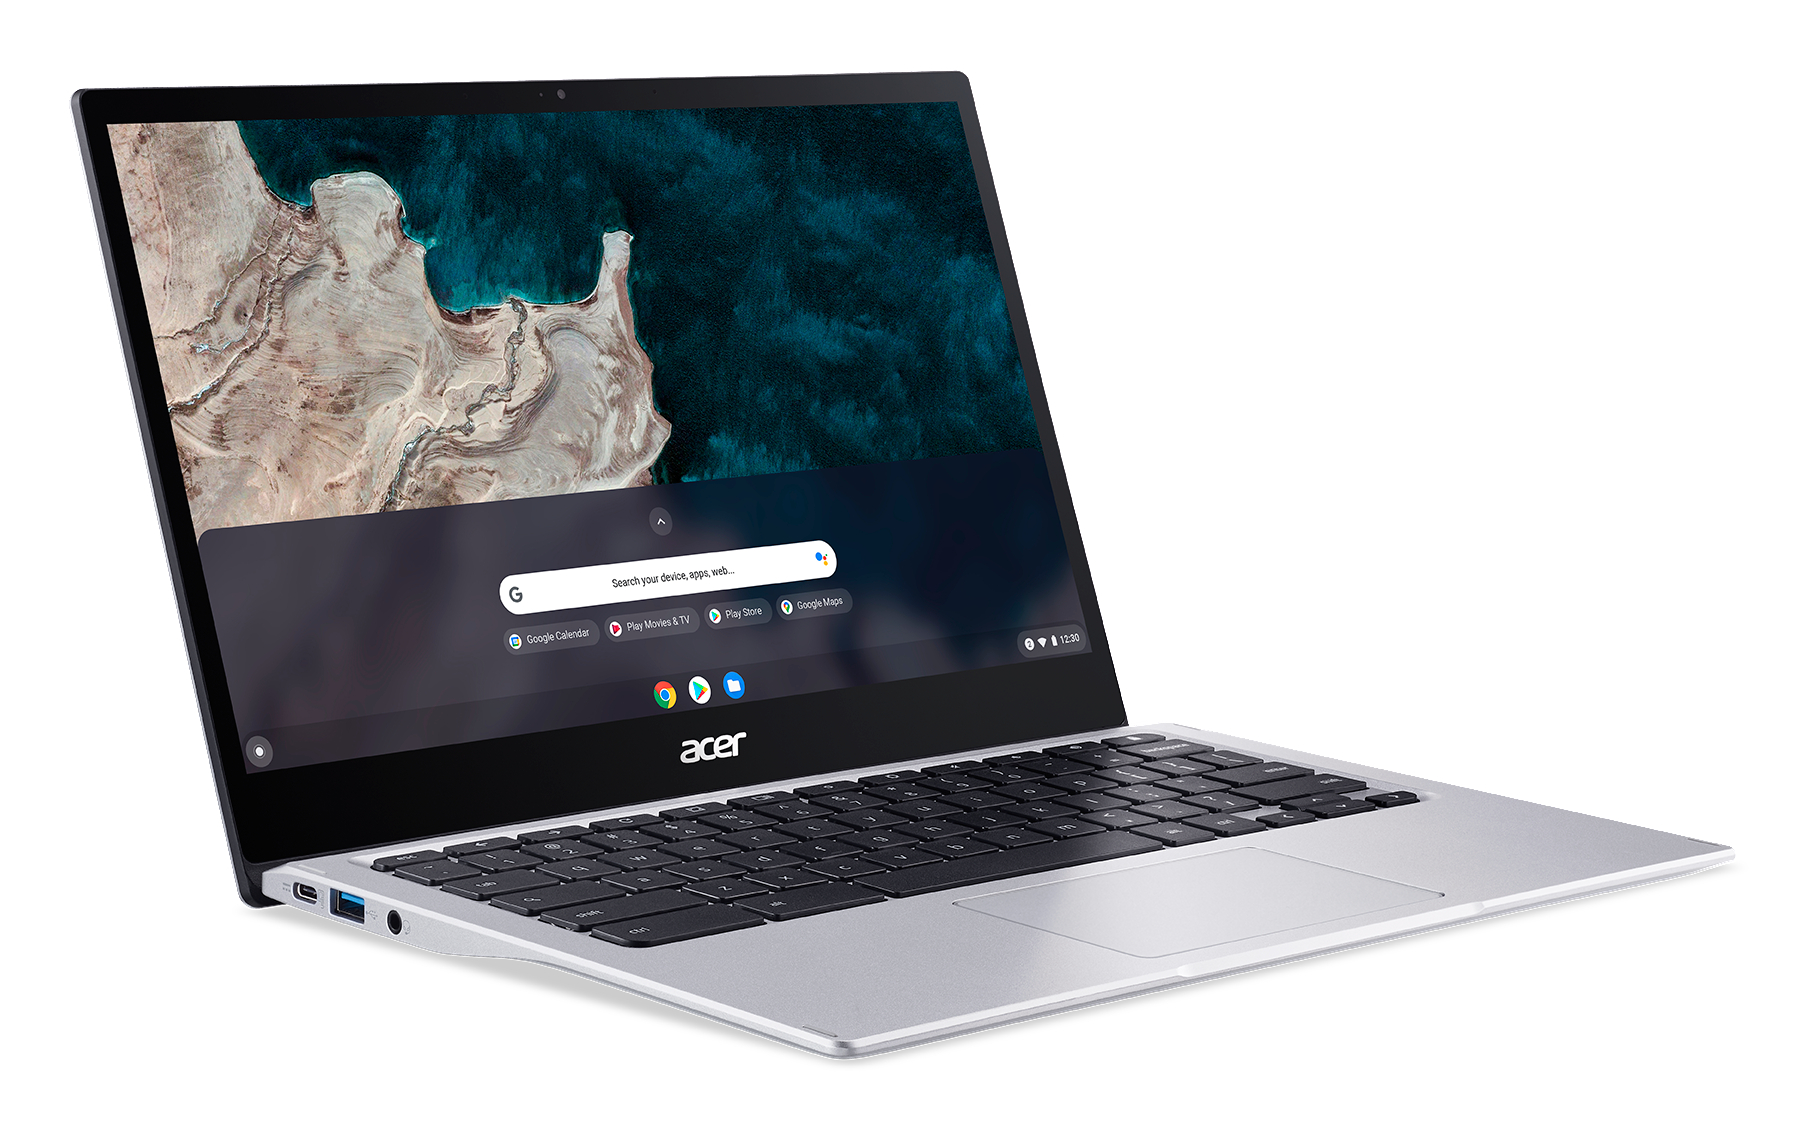 RAM, Spin Chromebook Tastaturbeleuchtung, 4 OS Graphics, mit mit Touchscreen, Zoll Chrome ACER Prozessor, GB Adreno™ Google Chromebook, 64 Silber eMMC, (CP513-1H-S72Y) Display Qualcomm 13,3 513 GB 7c Onboard